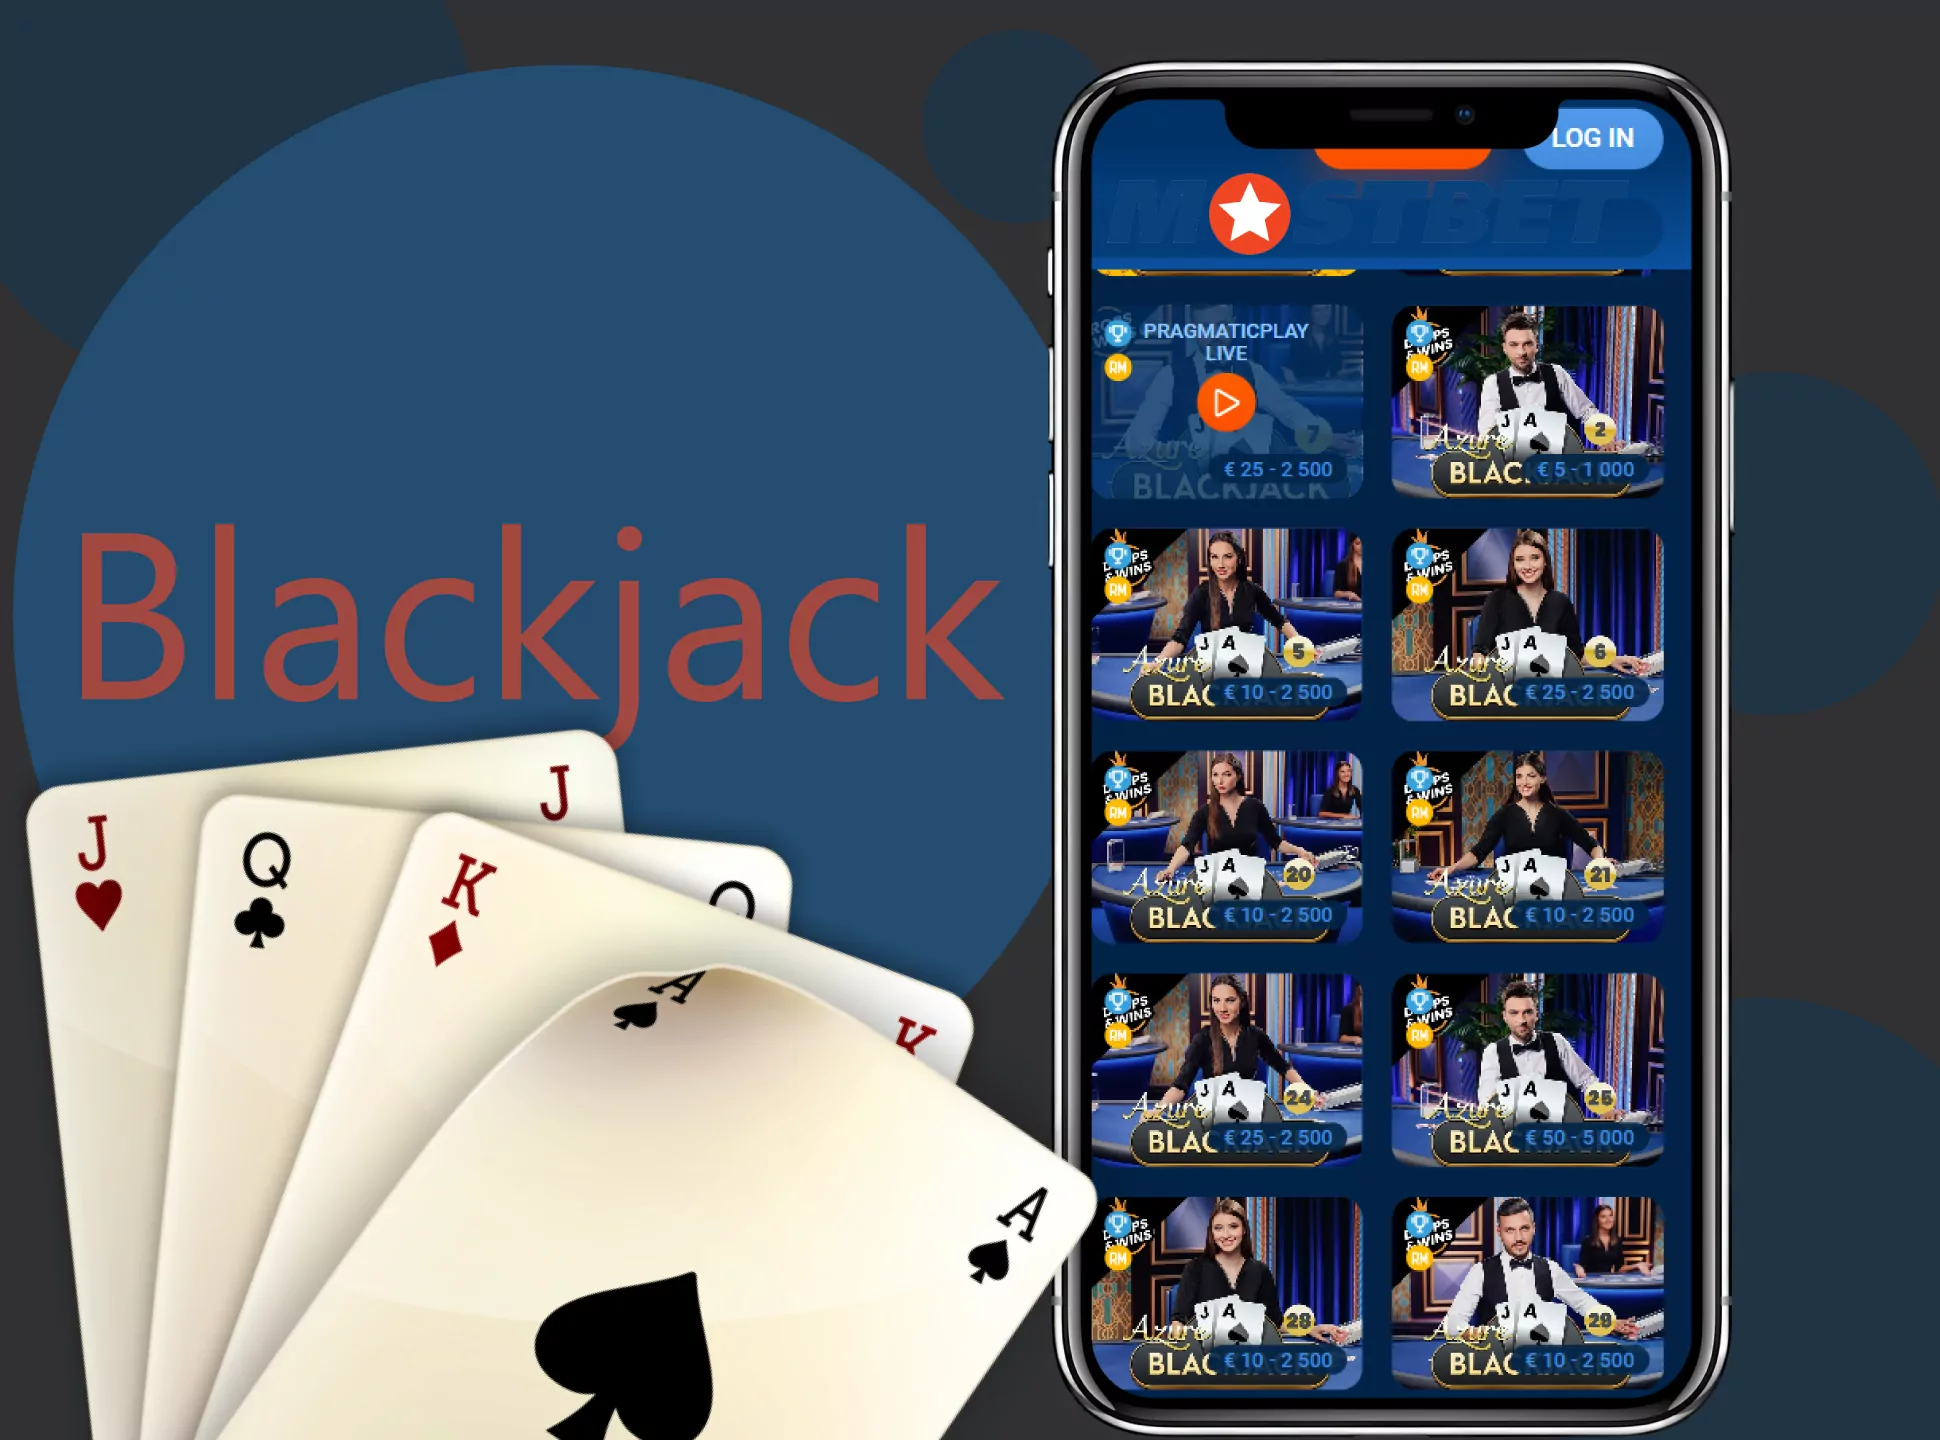 Get 21 points to win the live blackjack game.